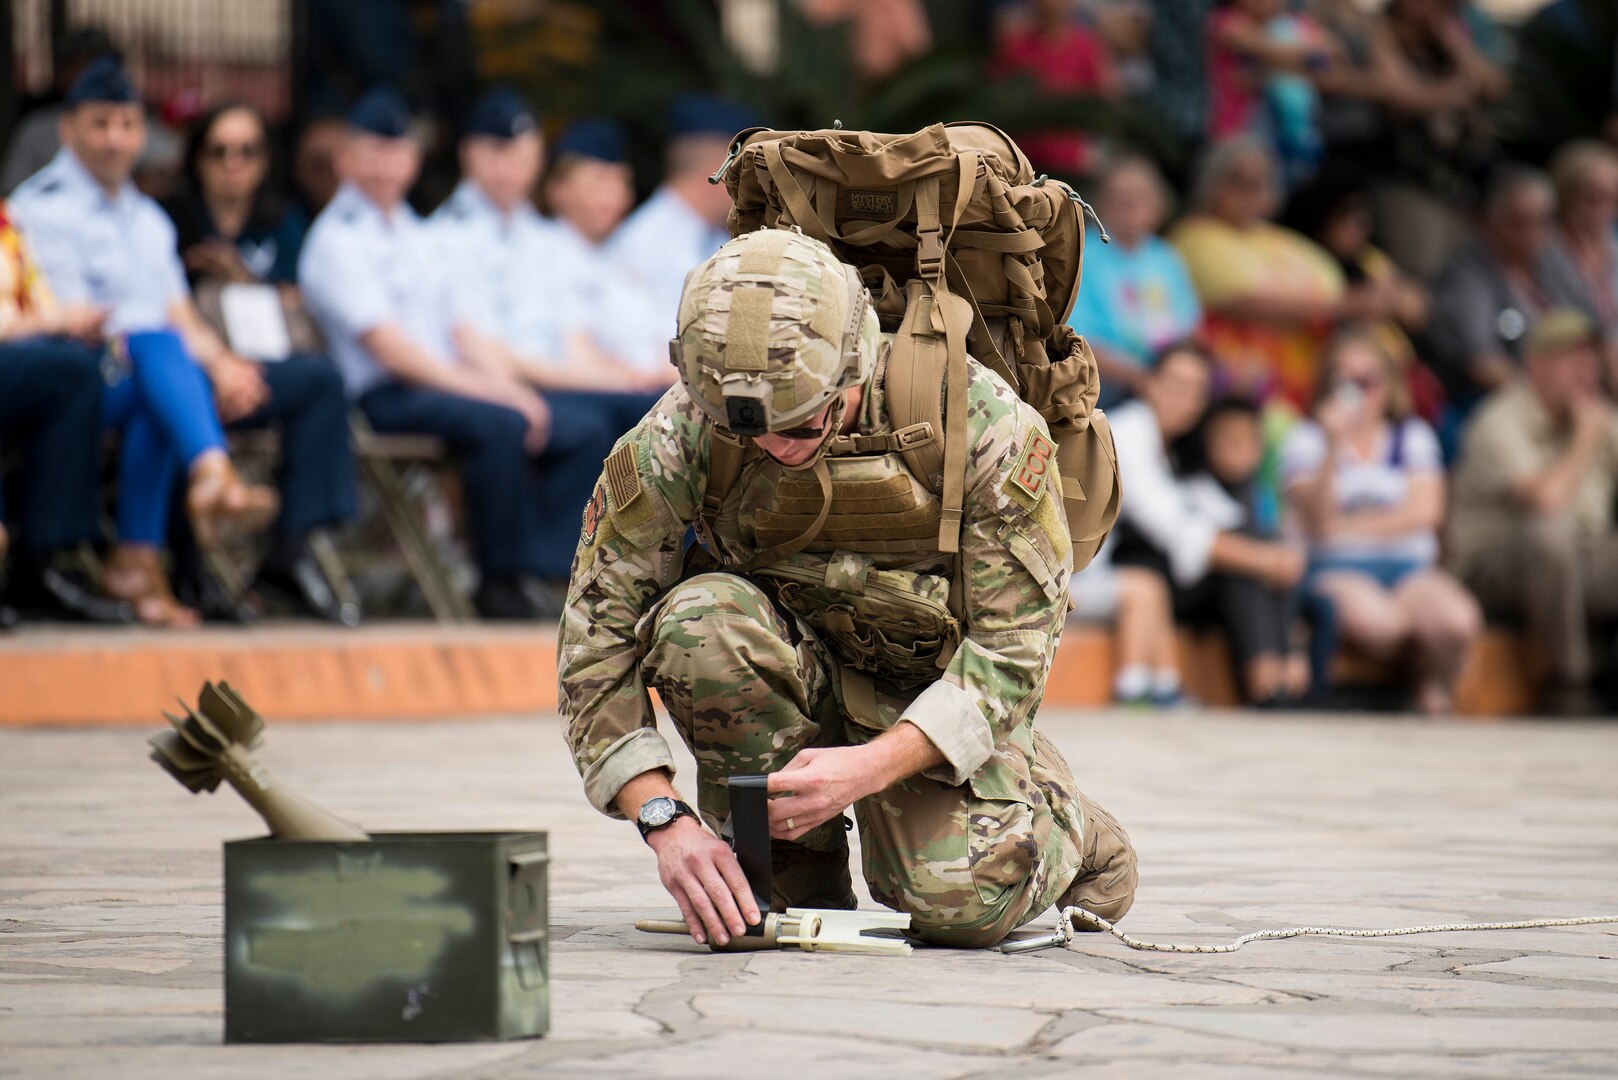 A member of the 502nd Civil Engineer Squadron, Explosive Ordnance Disposal, demonstrates equipment and methods for bomb detection and disposal during San Antonio’s Fiesta Air Force Day at the Alamo, April 22, 2019. From its beginning in 1891, Fiesta has grown into an annual celebration that includes civic and military observances, street and river parades, exhibits, pilgrimages and memorials.